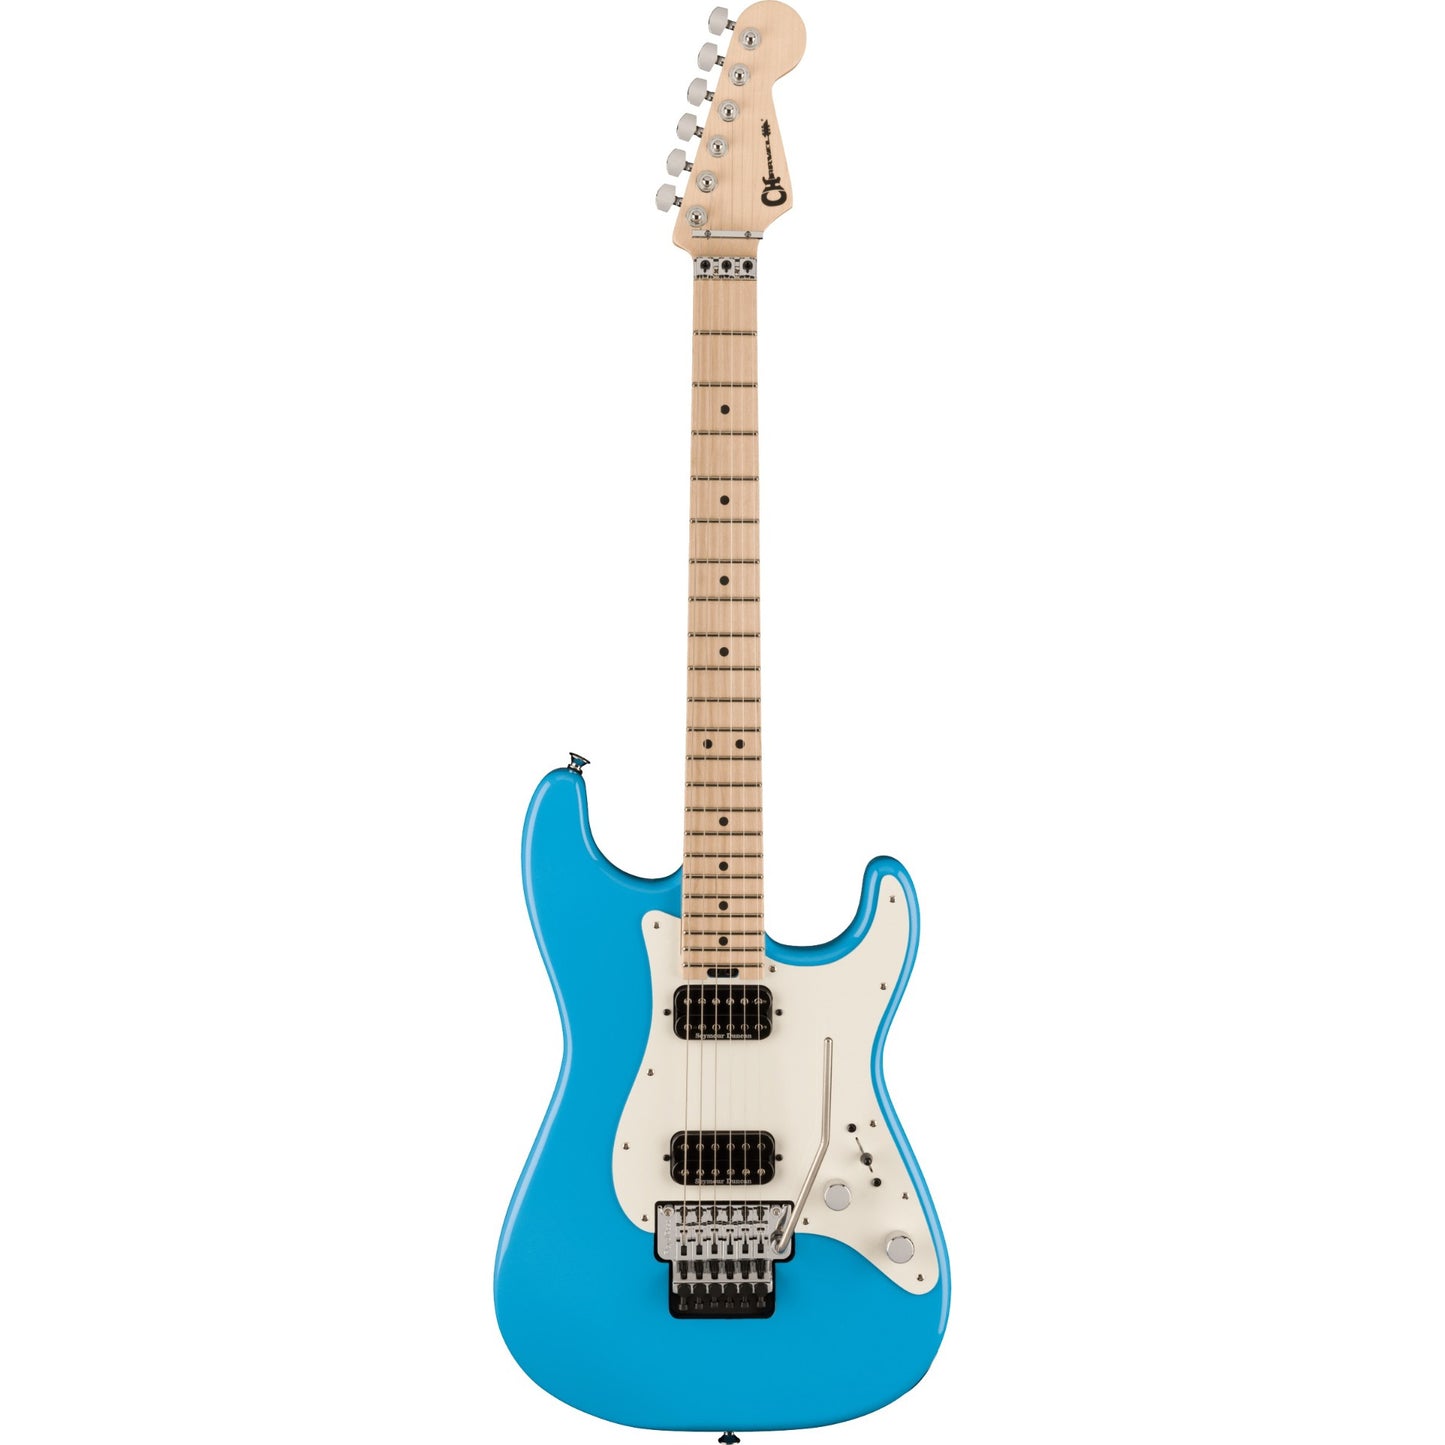 Charvel Pro-Mod So-Cal Style 1 HH FR M Electric Guitar in Infinity Blue